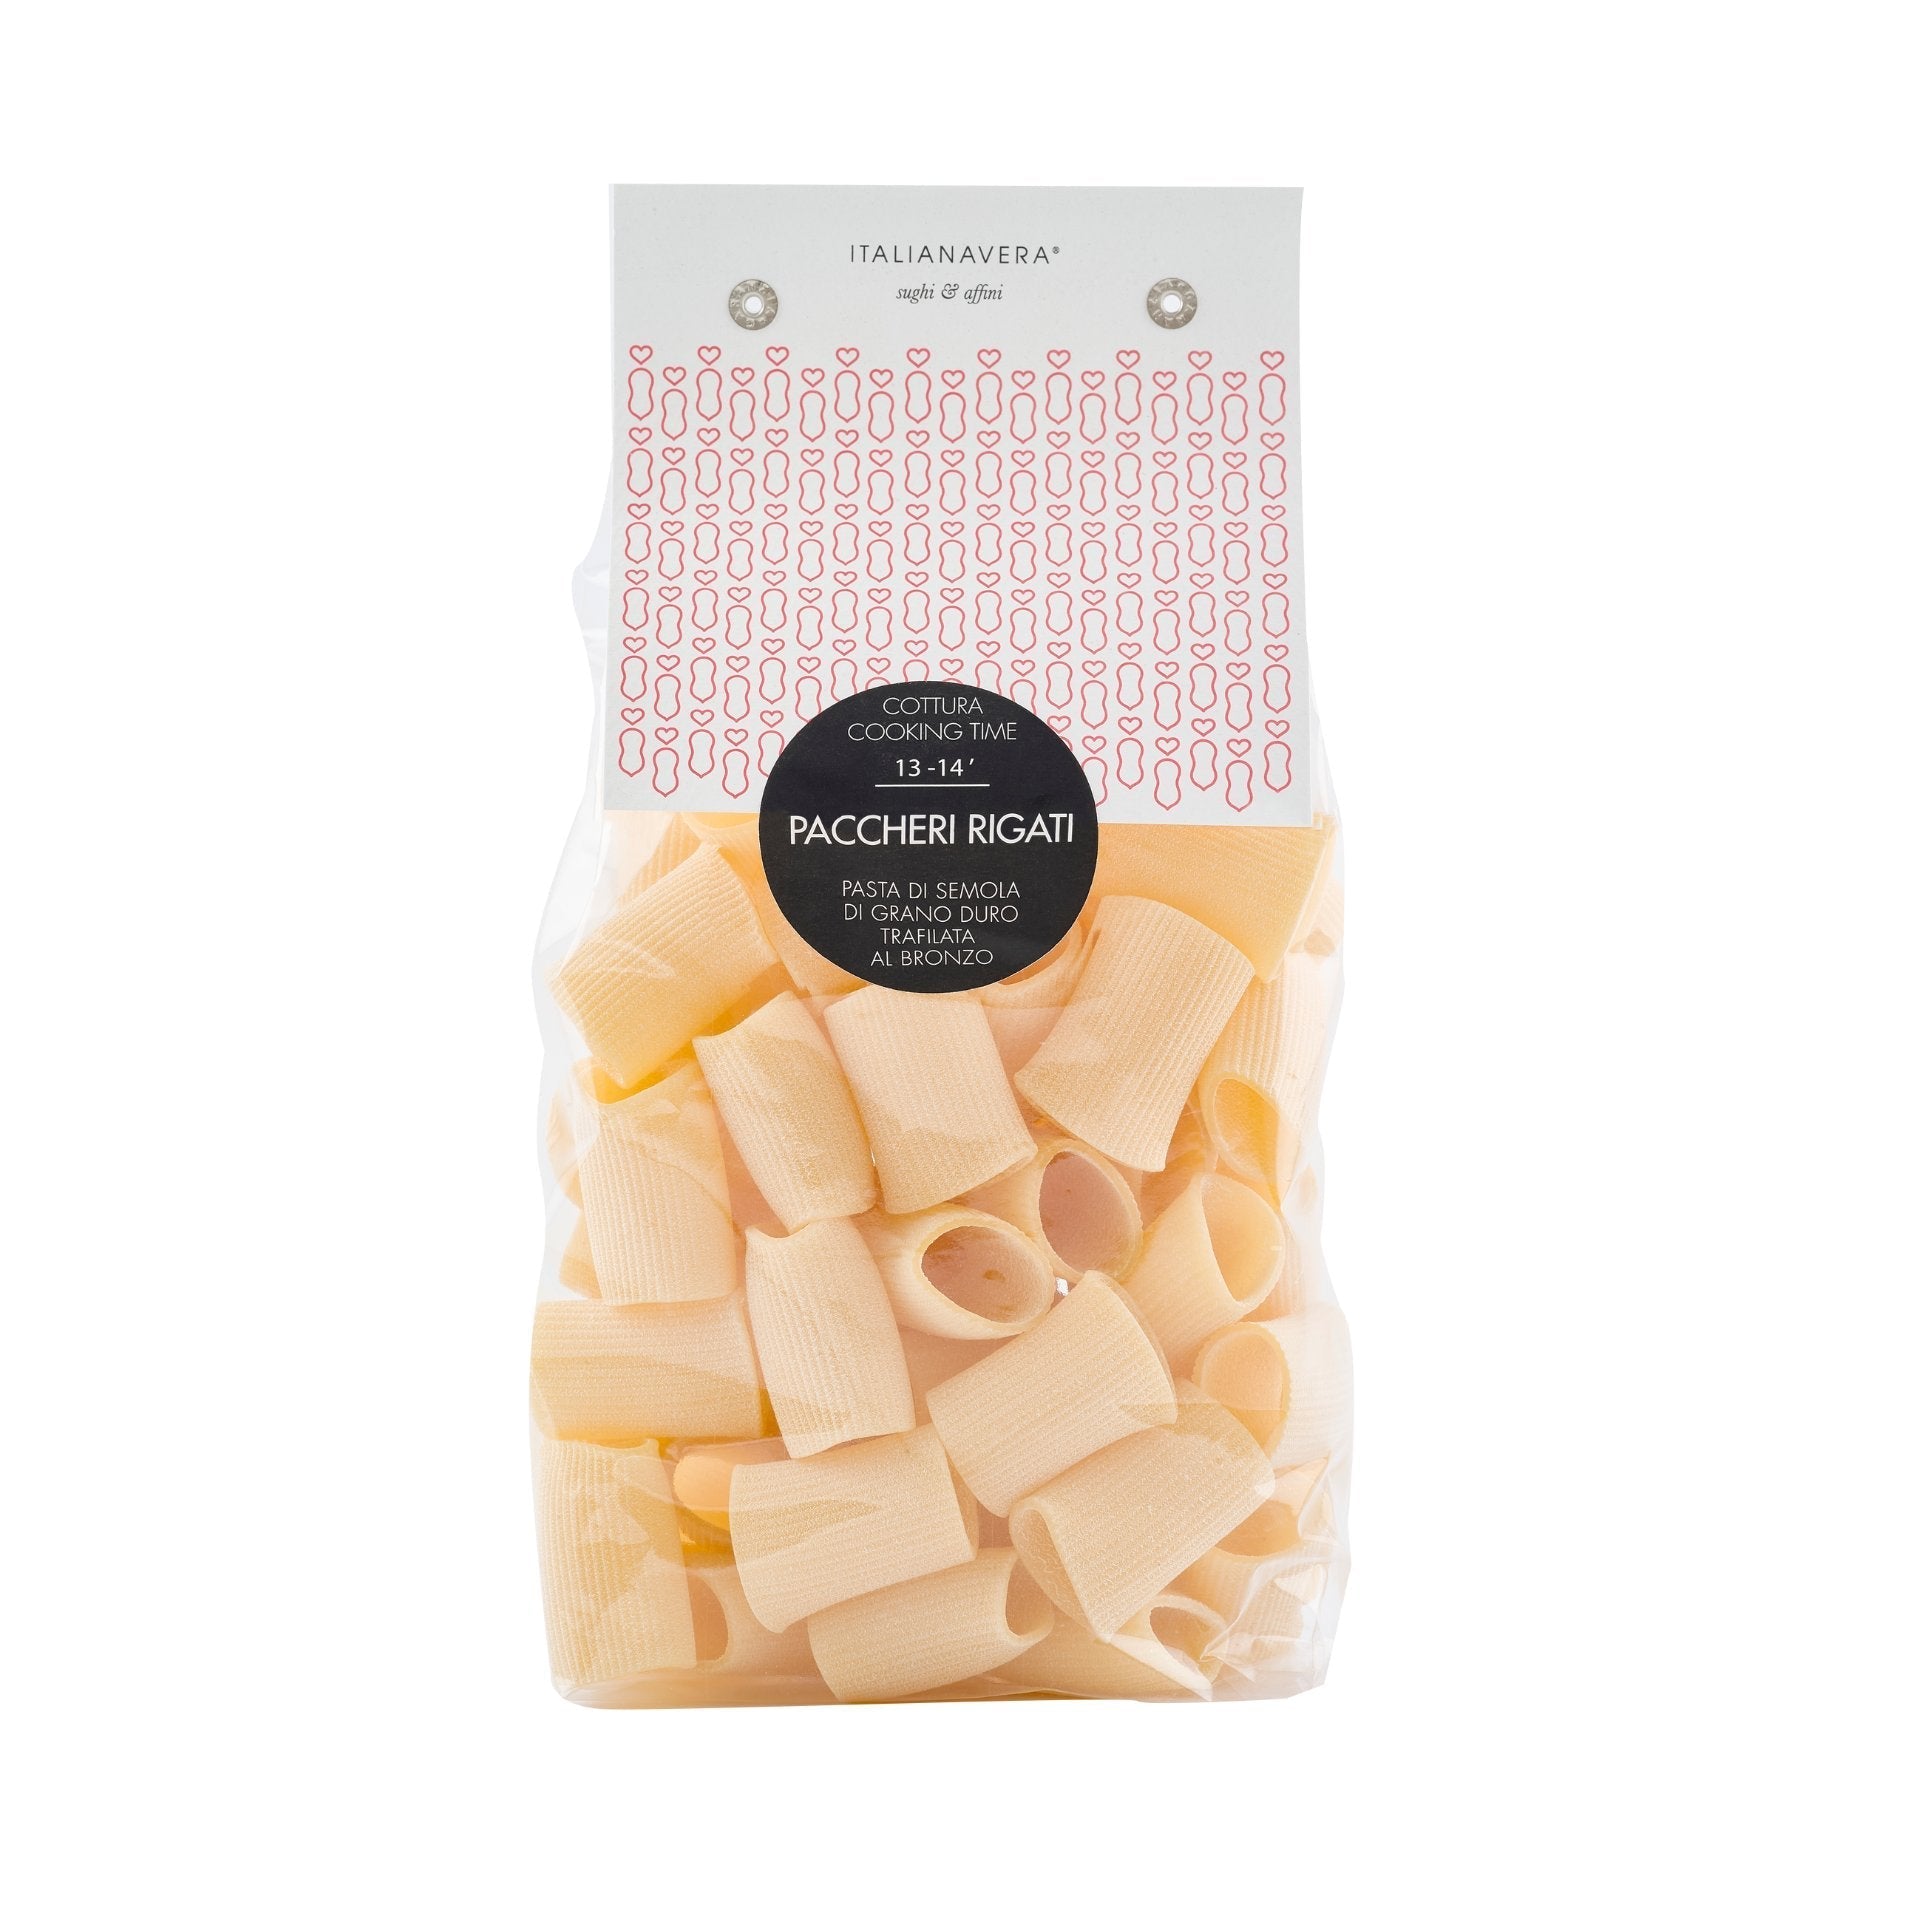 Italianavera Paccheri Rigati 500g  | Imported and distributed in the UK by Just Gourmet Foods